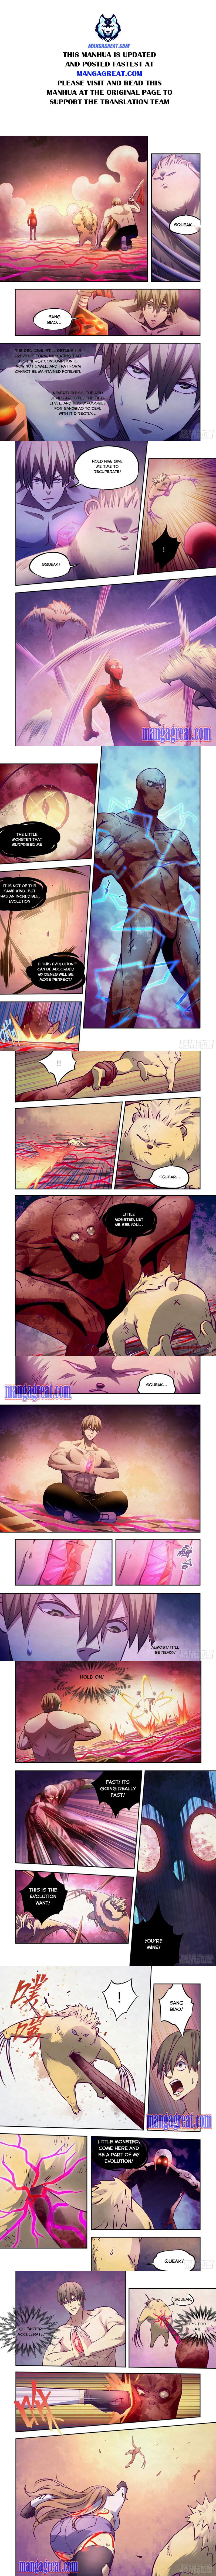 The Last Human Chapter 302 page 1